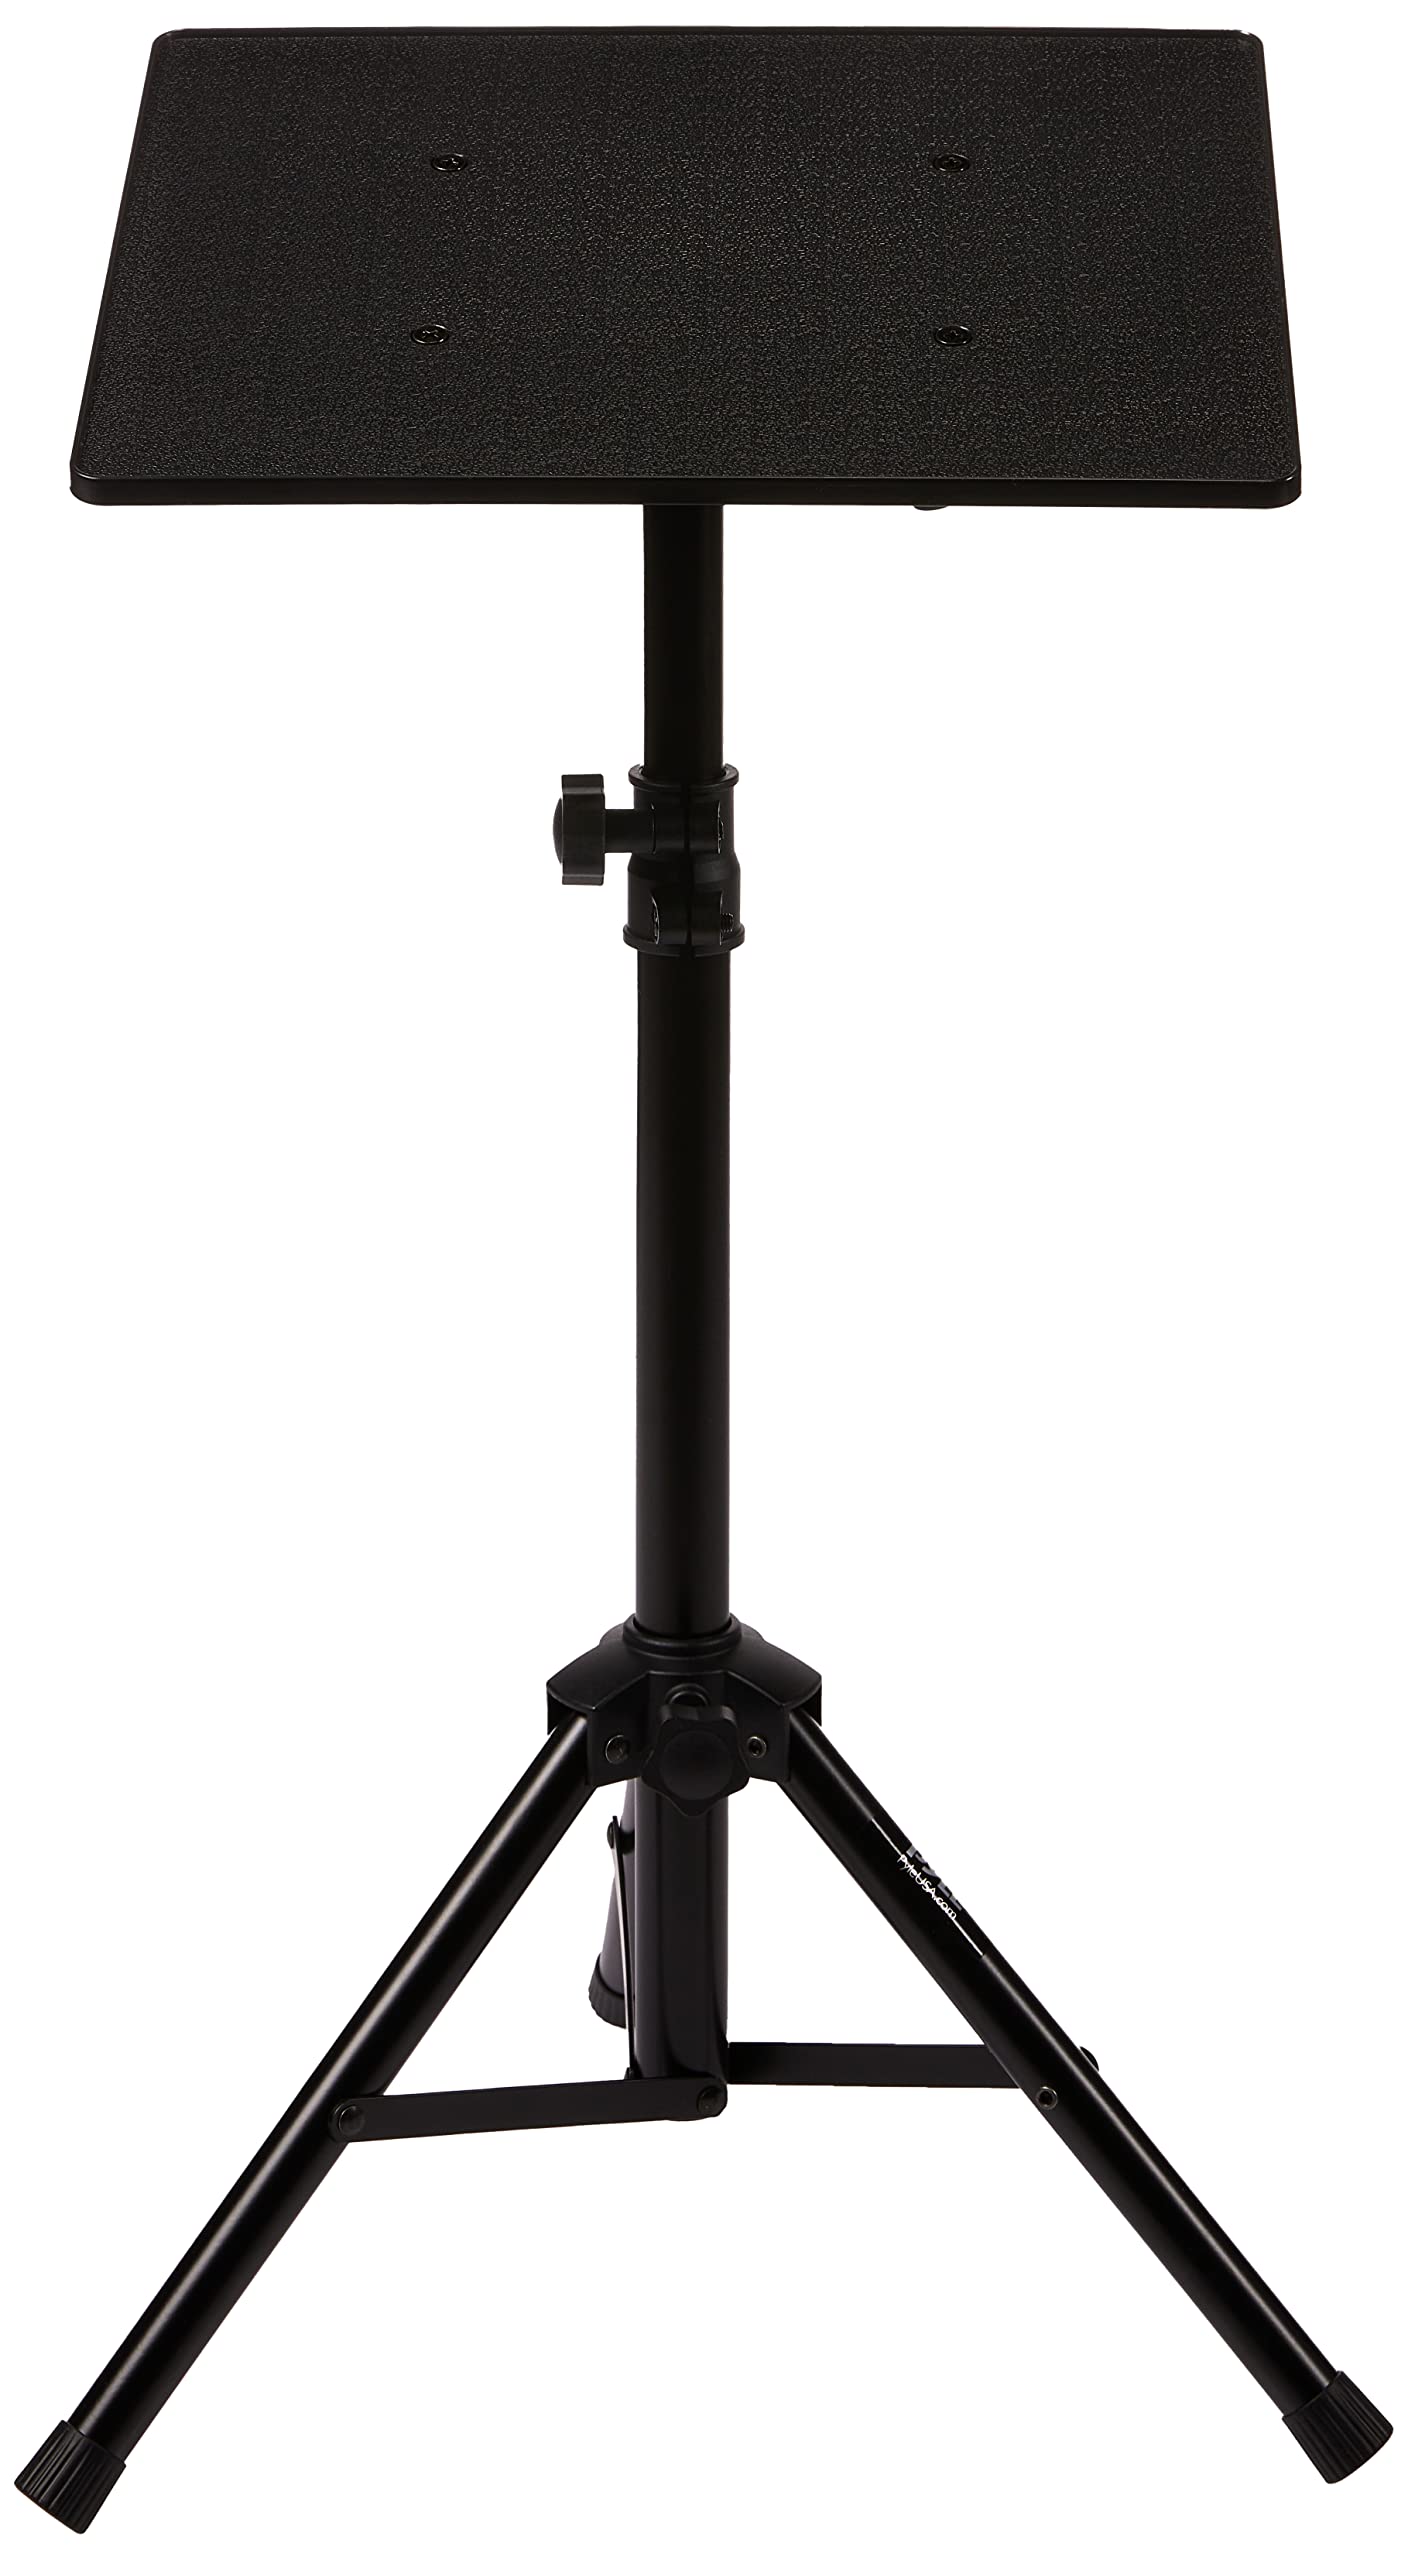 PYLE-PRO Universal Laptop Projector Tripod Stand - Computer, Book, DJ Equipment Holder Mount Height Adjustable Up to 35 Inches w/ 14'' x 11'' Plate Size - Perfect for Stage or Studio Use PLPTS2